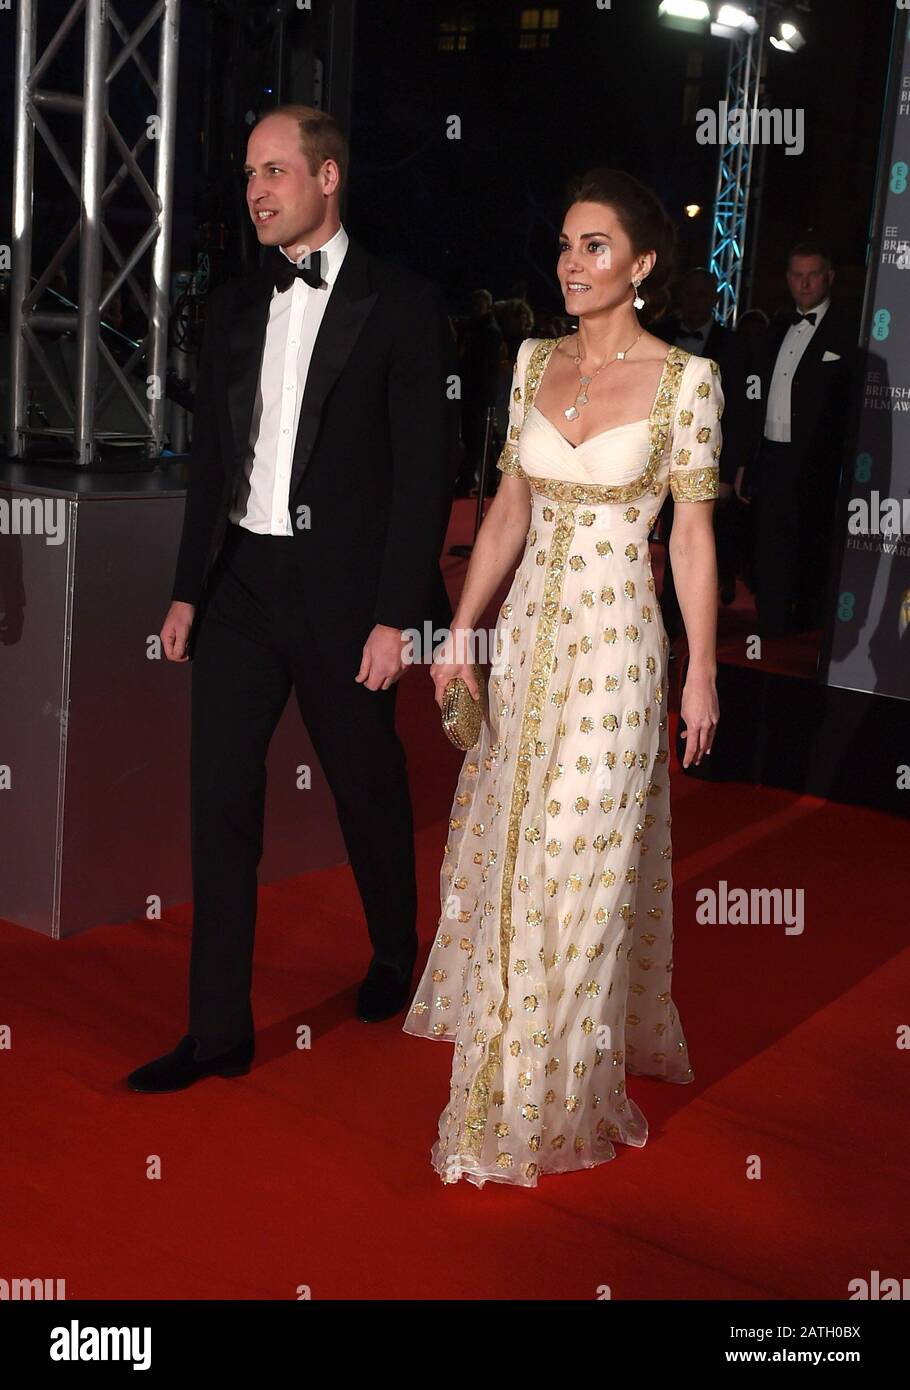 Photo Must Be Credited ©Alpha Press 079965 02/02/2020 Prince William Duke Of Cambridge and Kate Duchess of Cambridge Catherine Katherine Middleton at the EE BAFTA British Academy Film Awards 2020 At The Royal Albert Hall In London Stock Photo